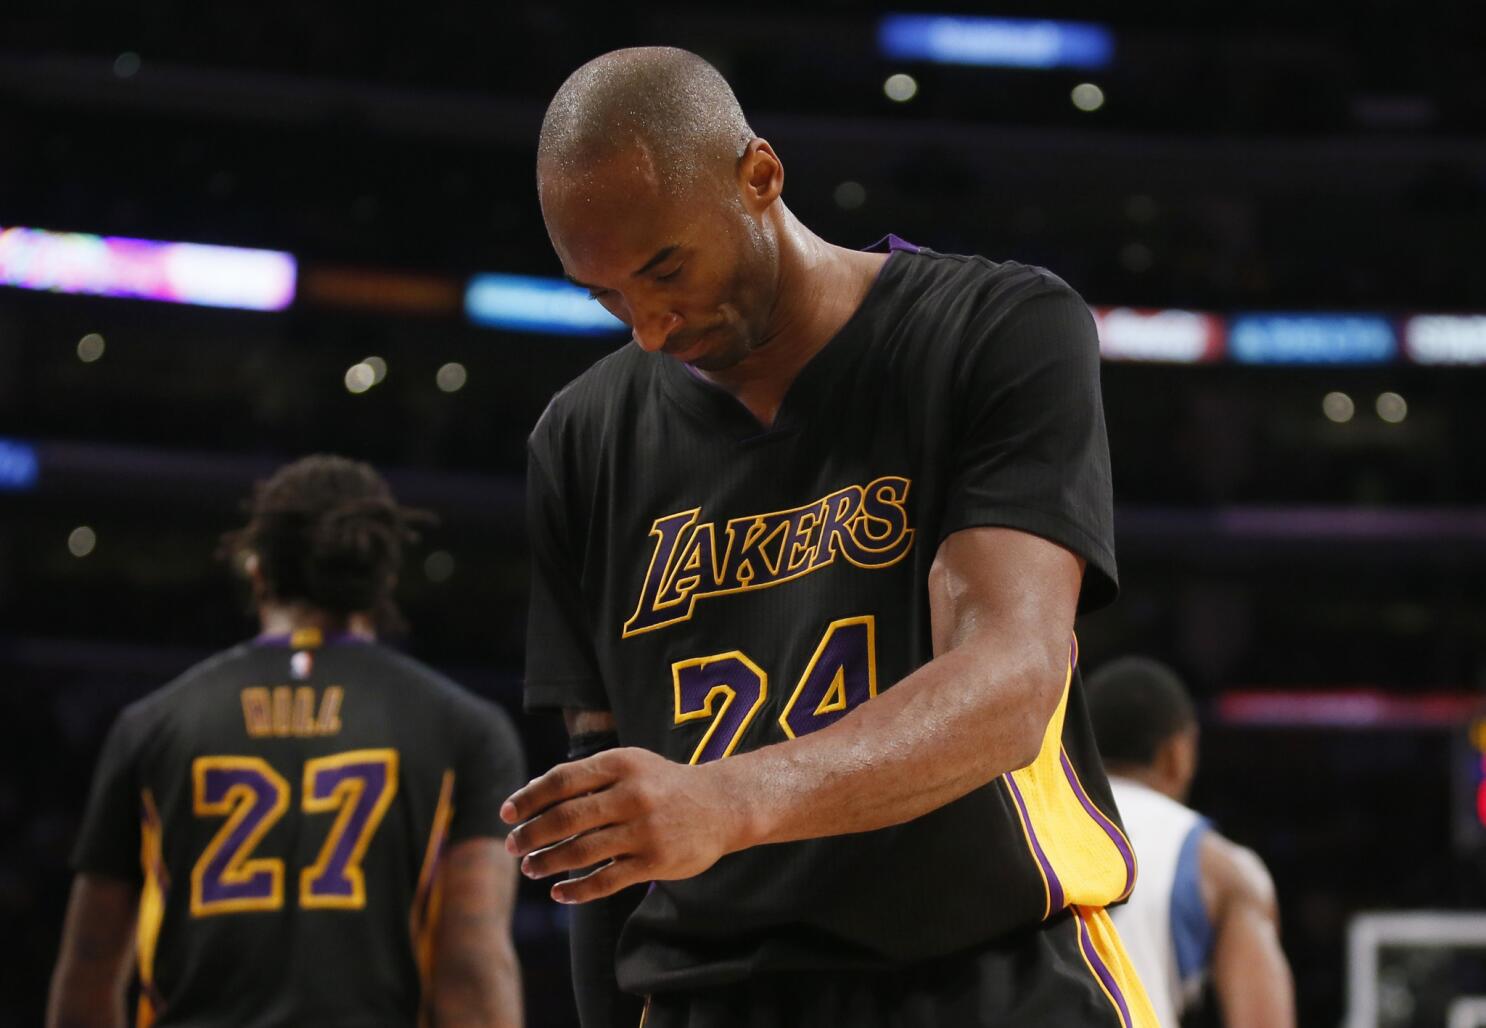 lakings rocked Kobe Bryant jerseys to their game. They also wore